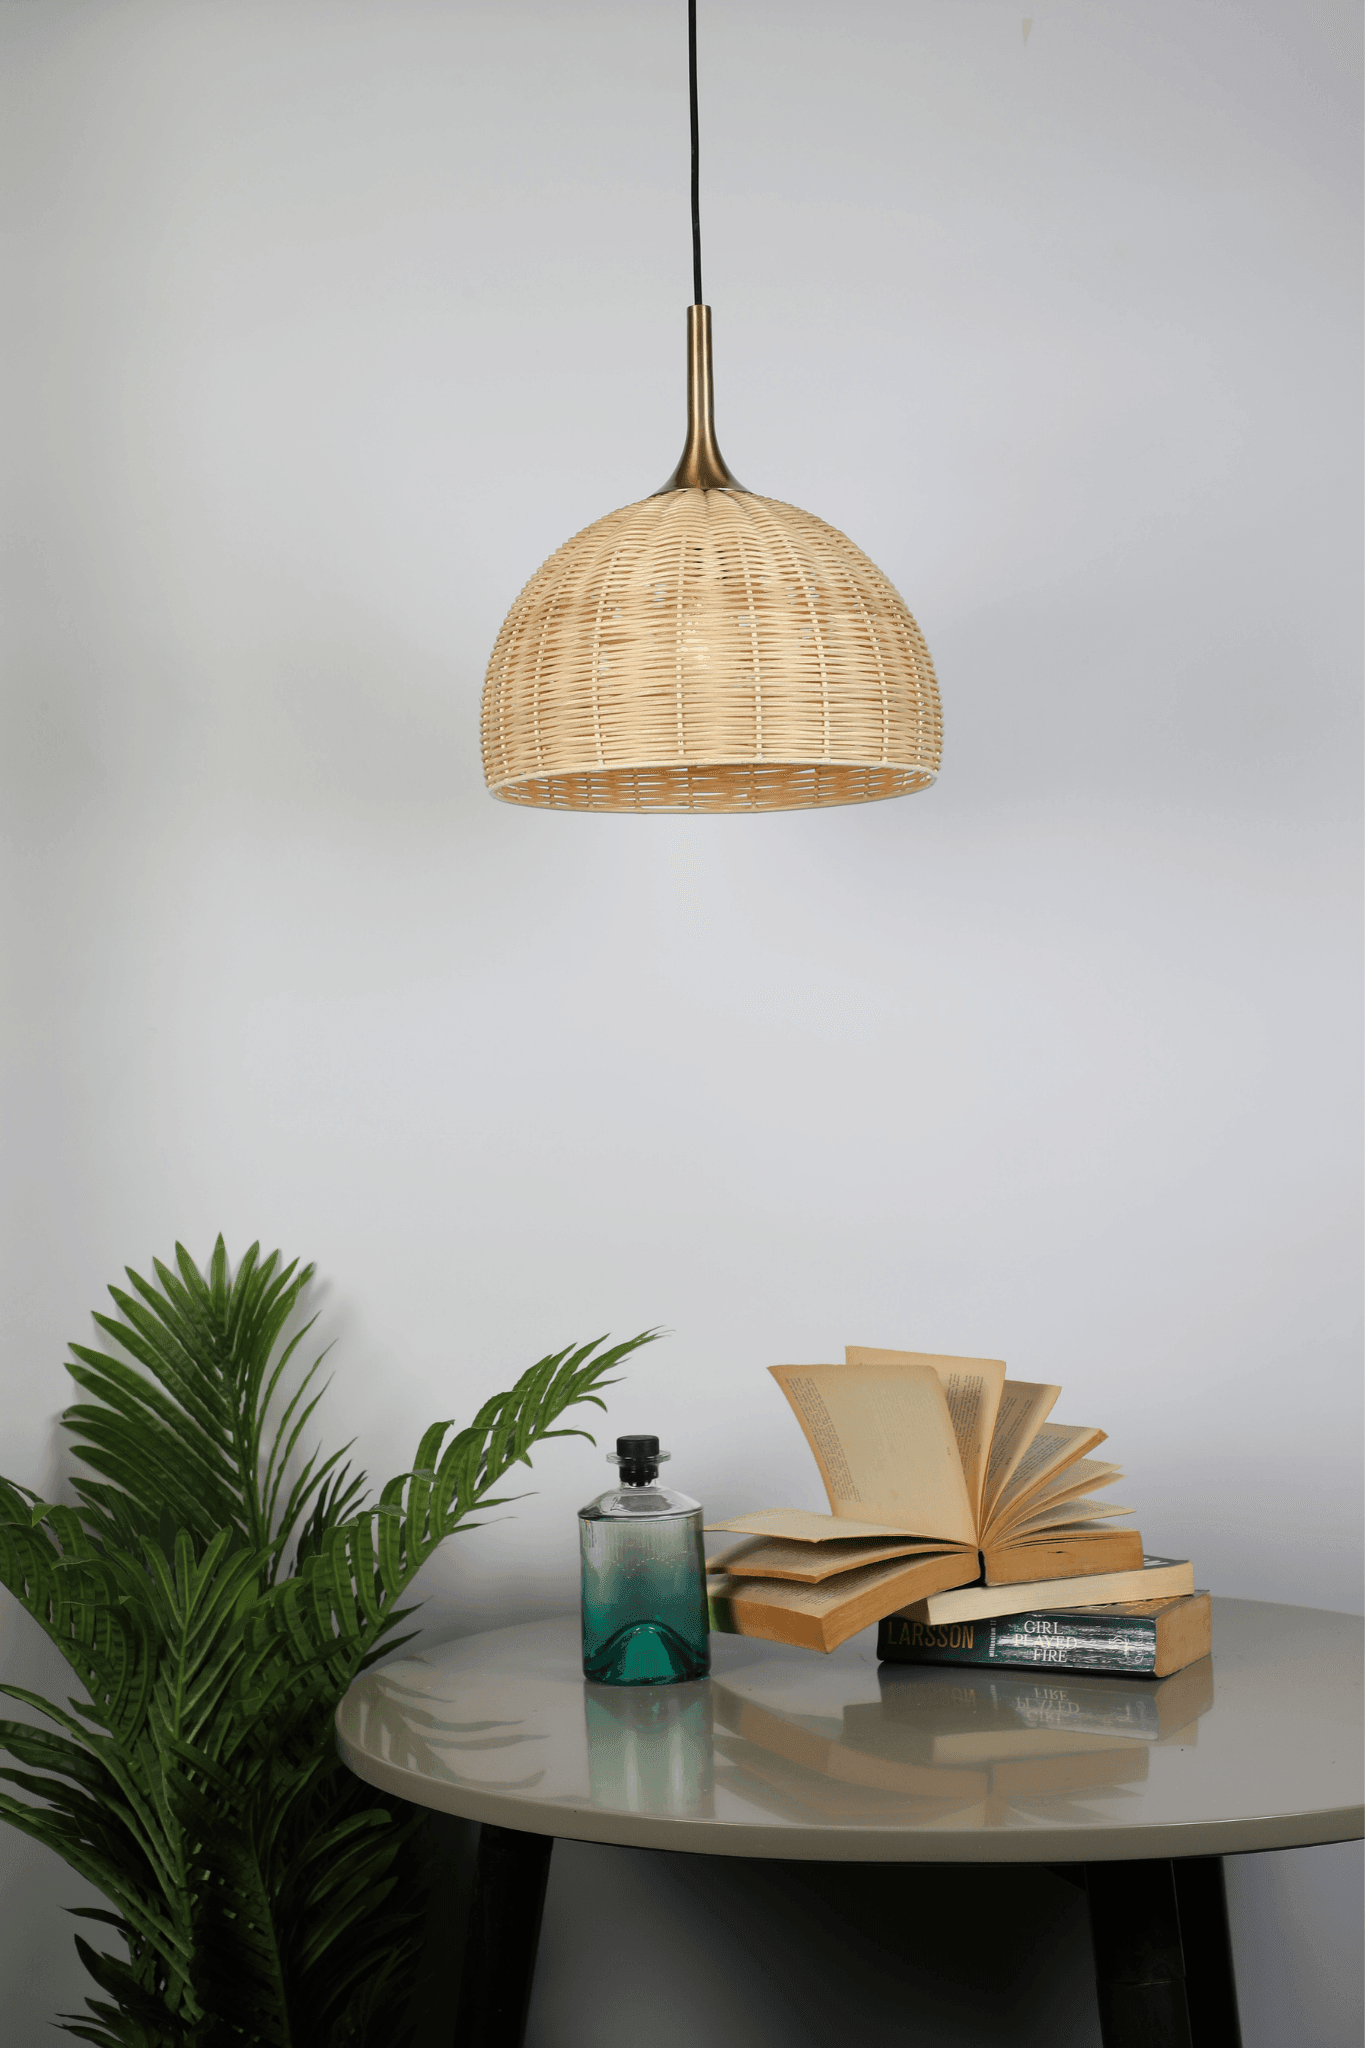 Florimia Handcrafted Pendant Light by The Light Library